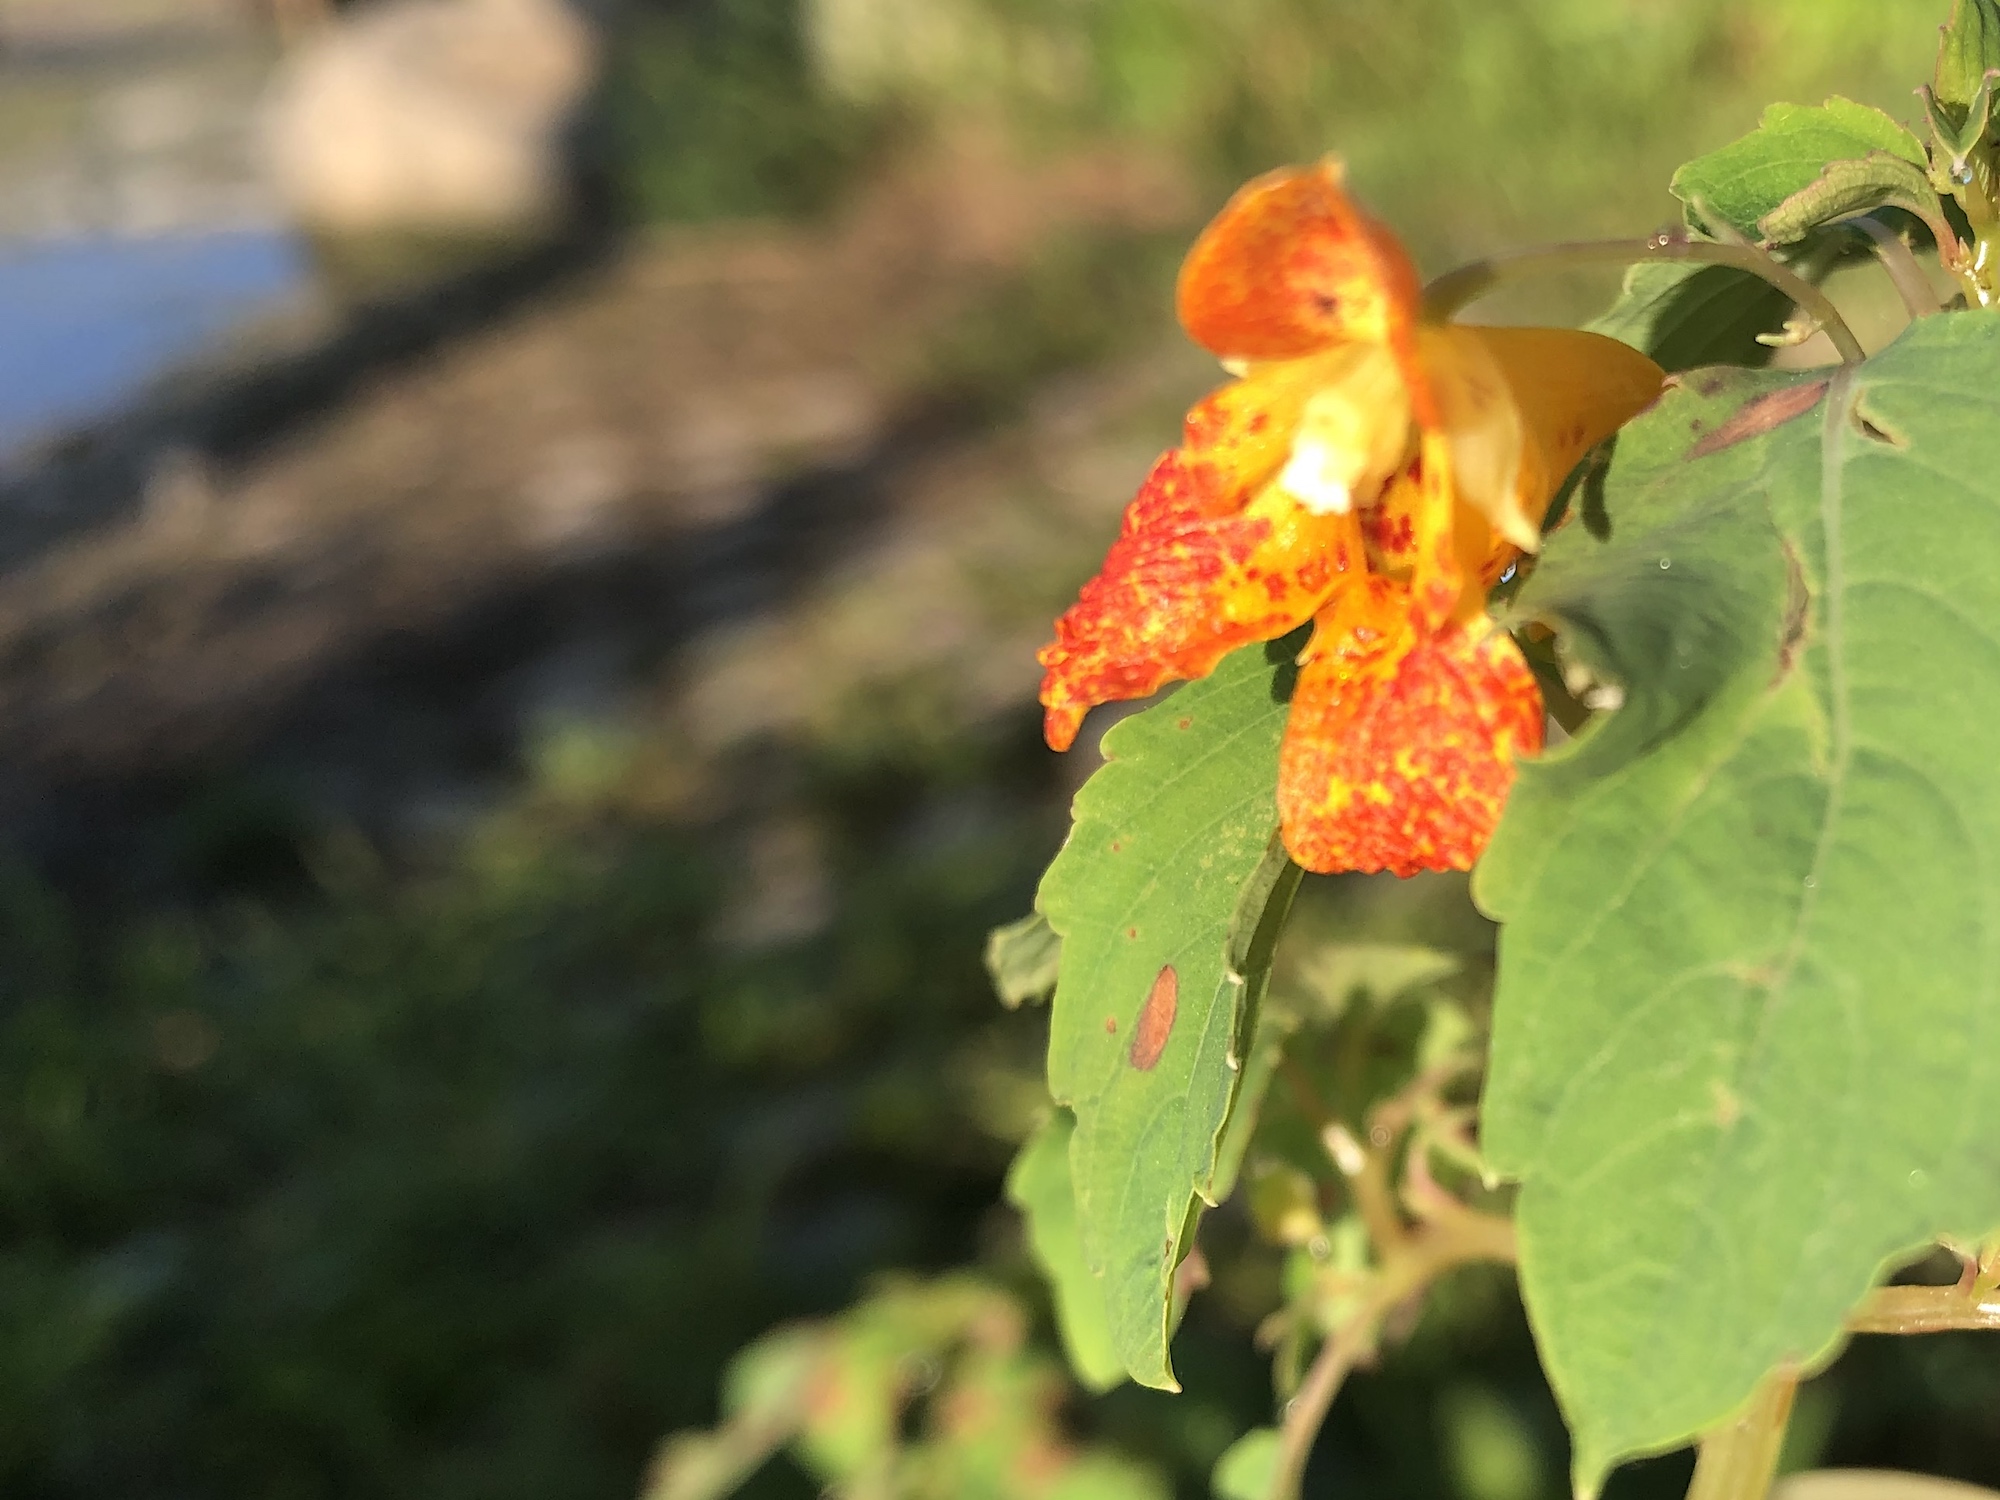 Spotted Jewelweed on shore of Lake Wingra in Wingra Park on August 2, 2019.